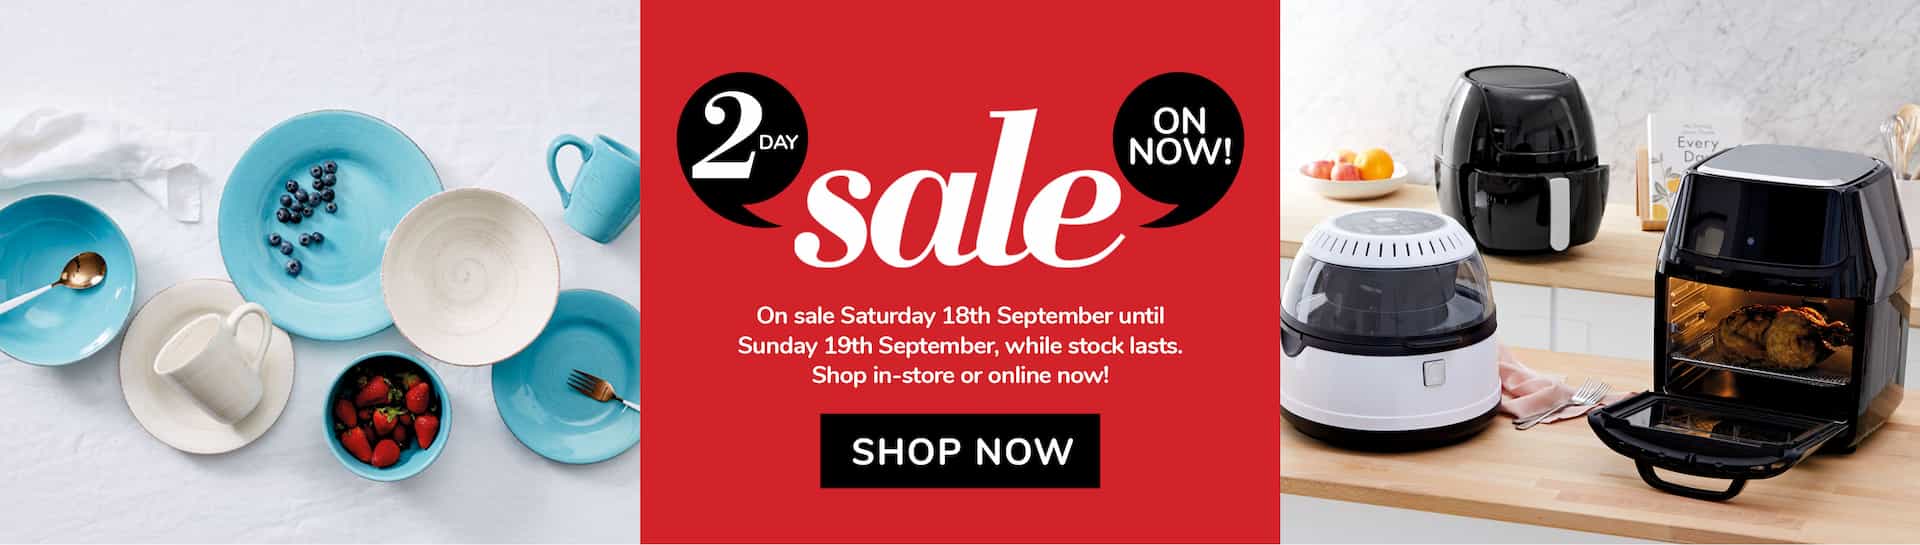 Up to 50% OFF on clothing, footwear, cookware at Harris Scarfe